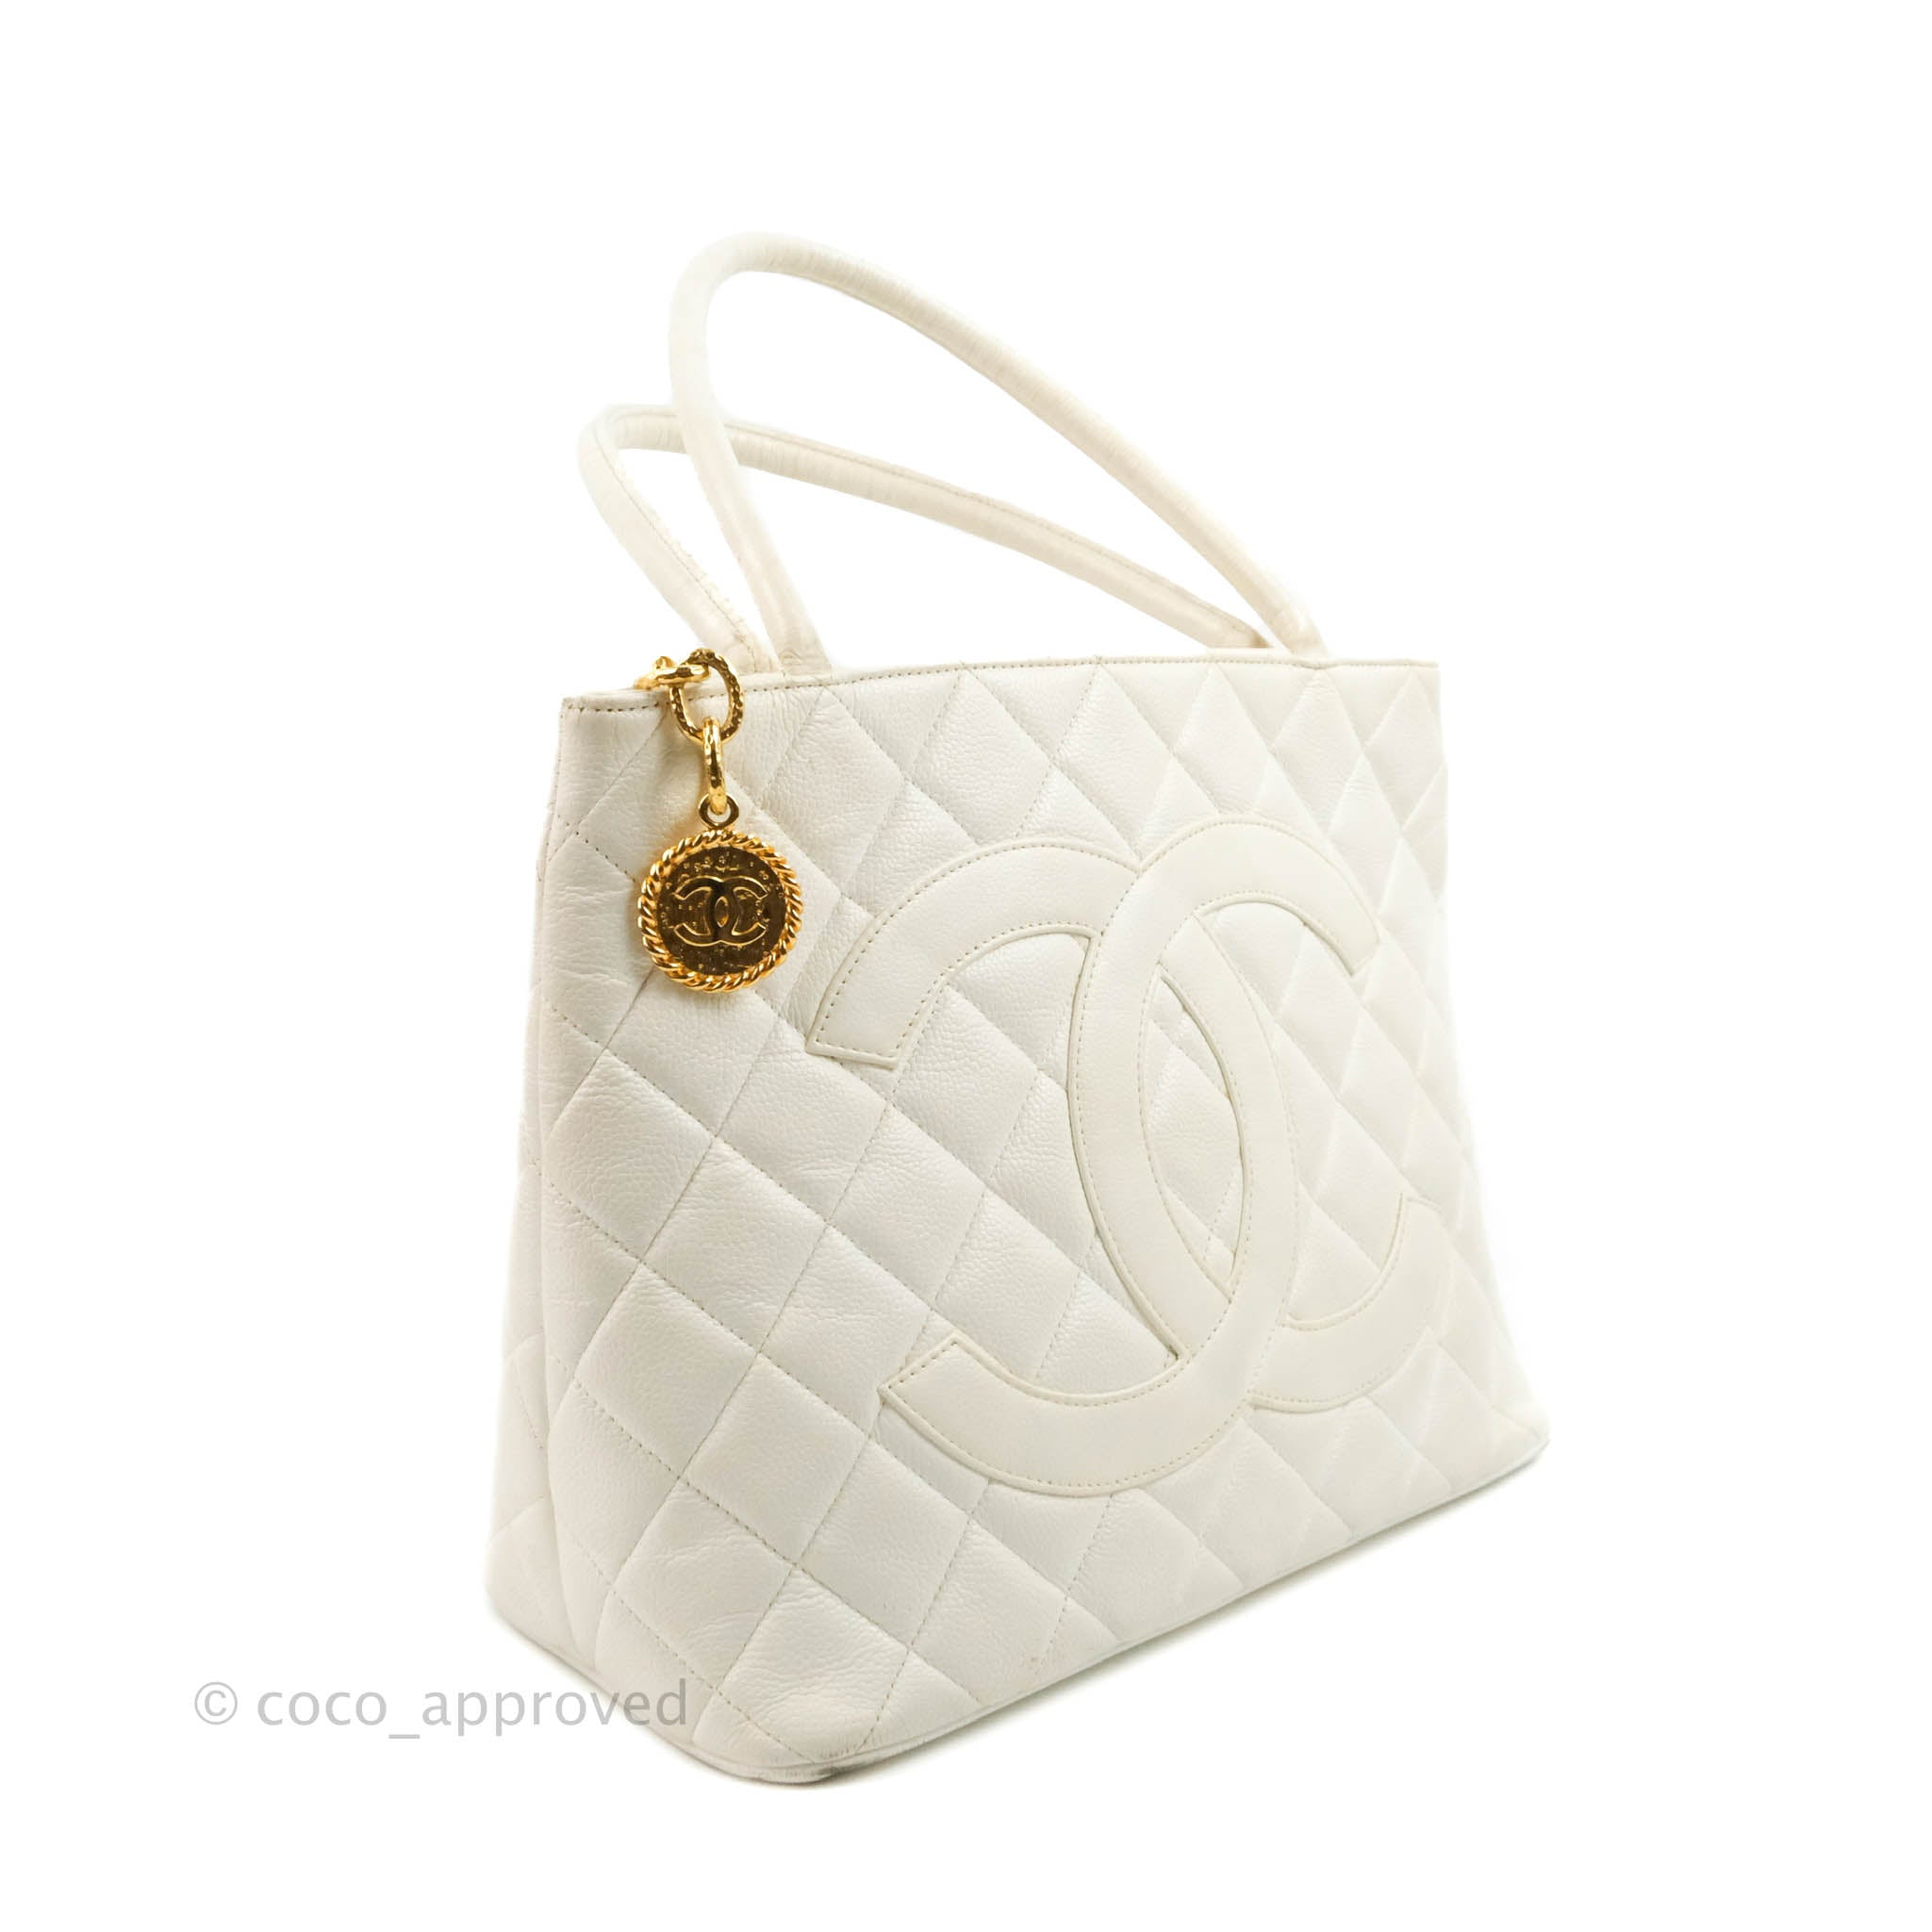 CHANEL Caviar Quilted Medallion Tote White 180322